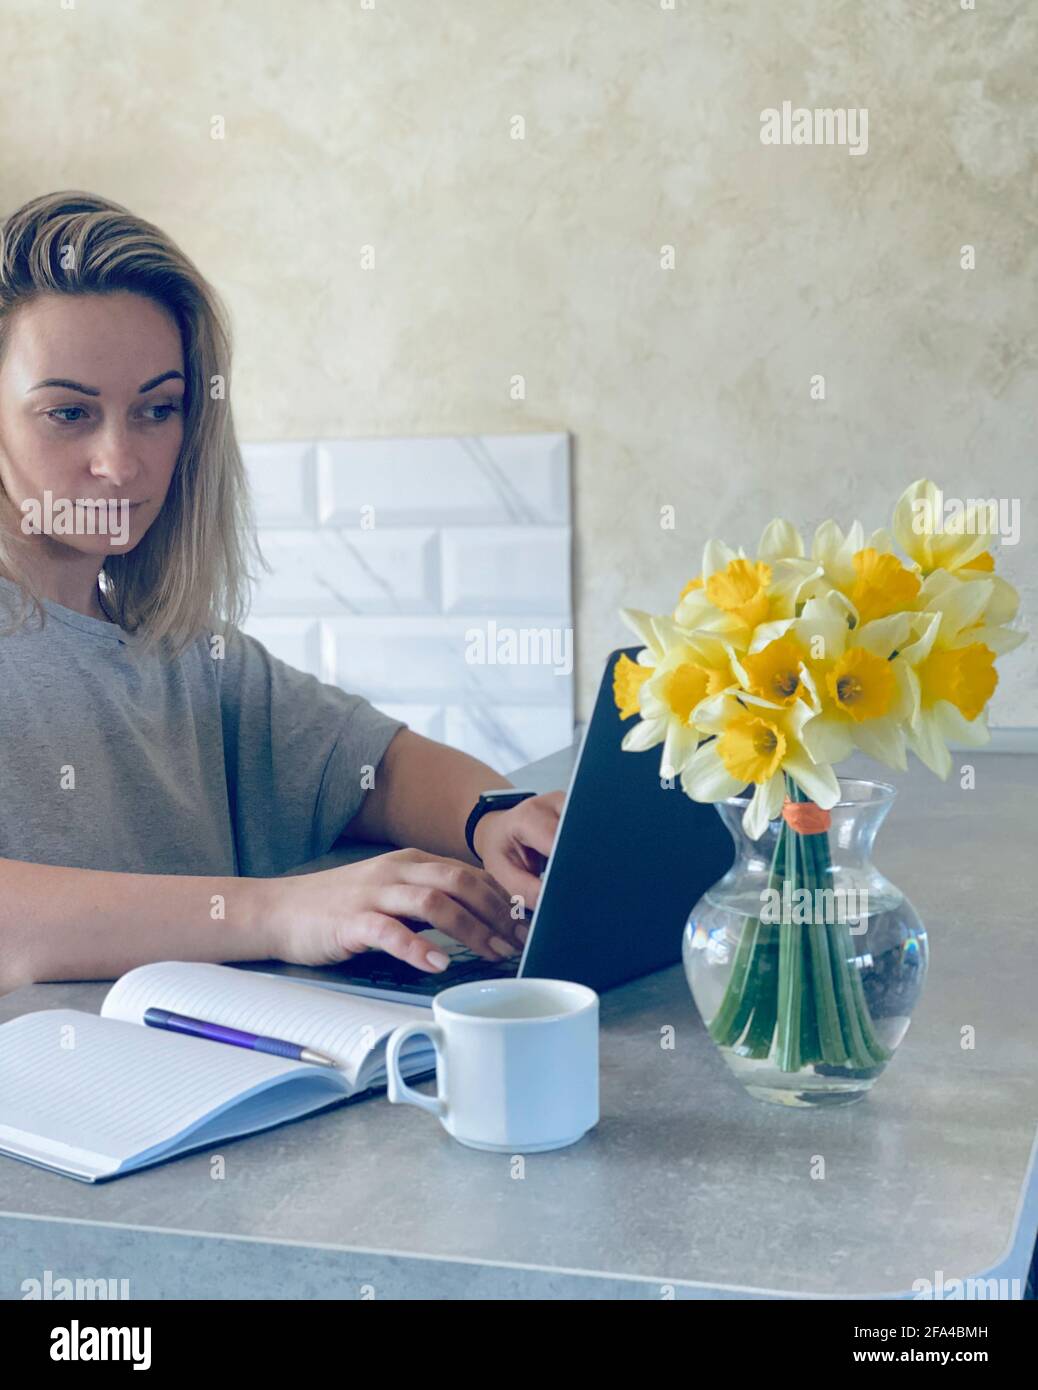 woman working at the computer free space Stock Photo